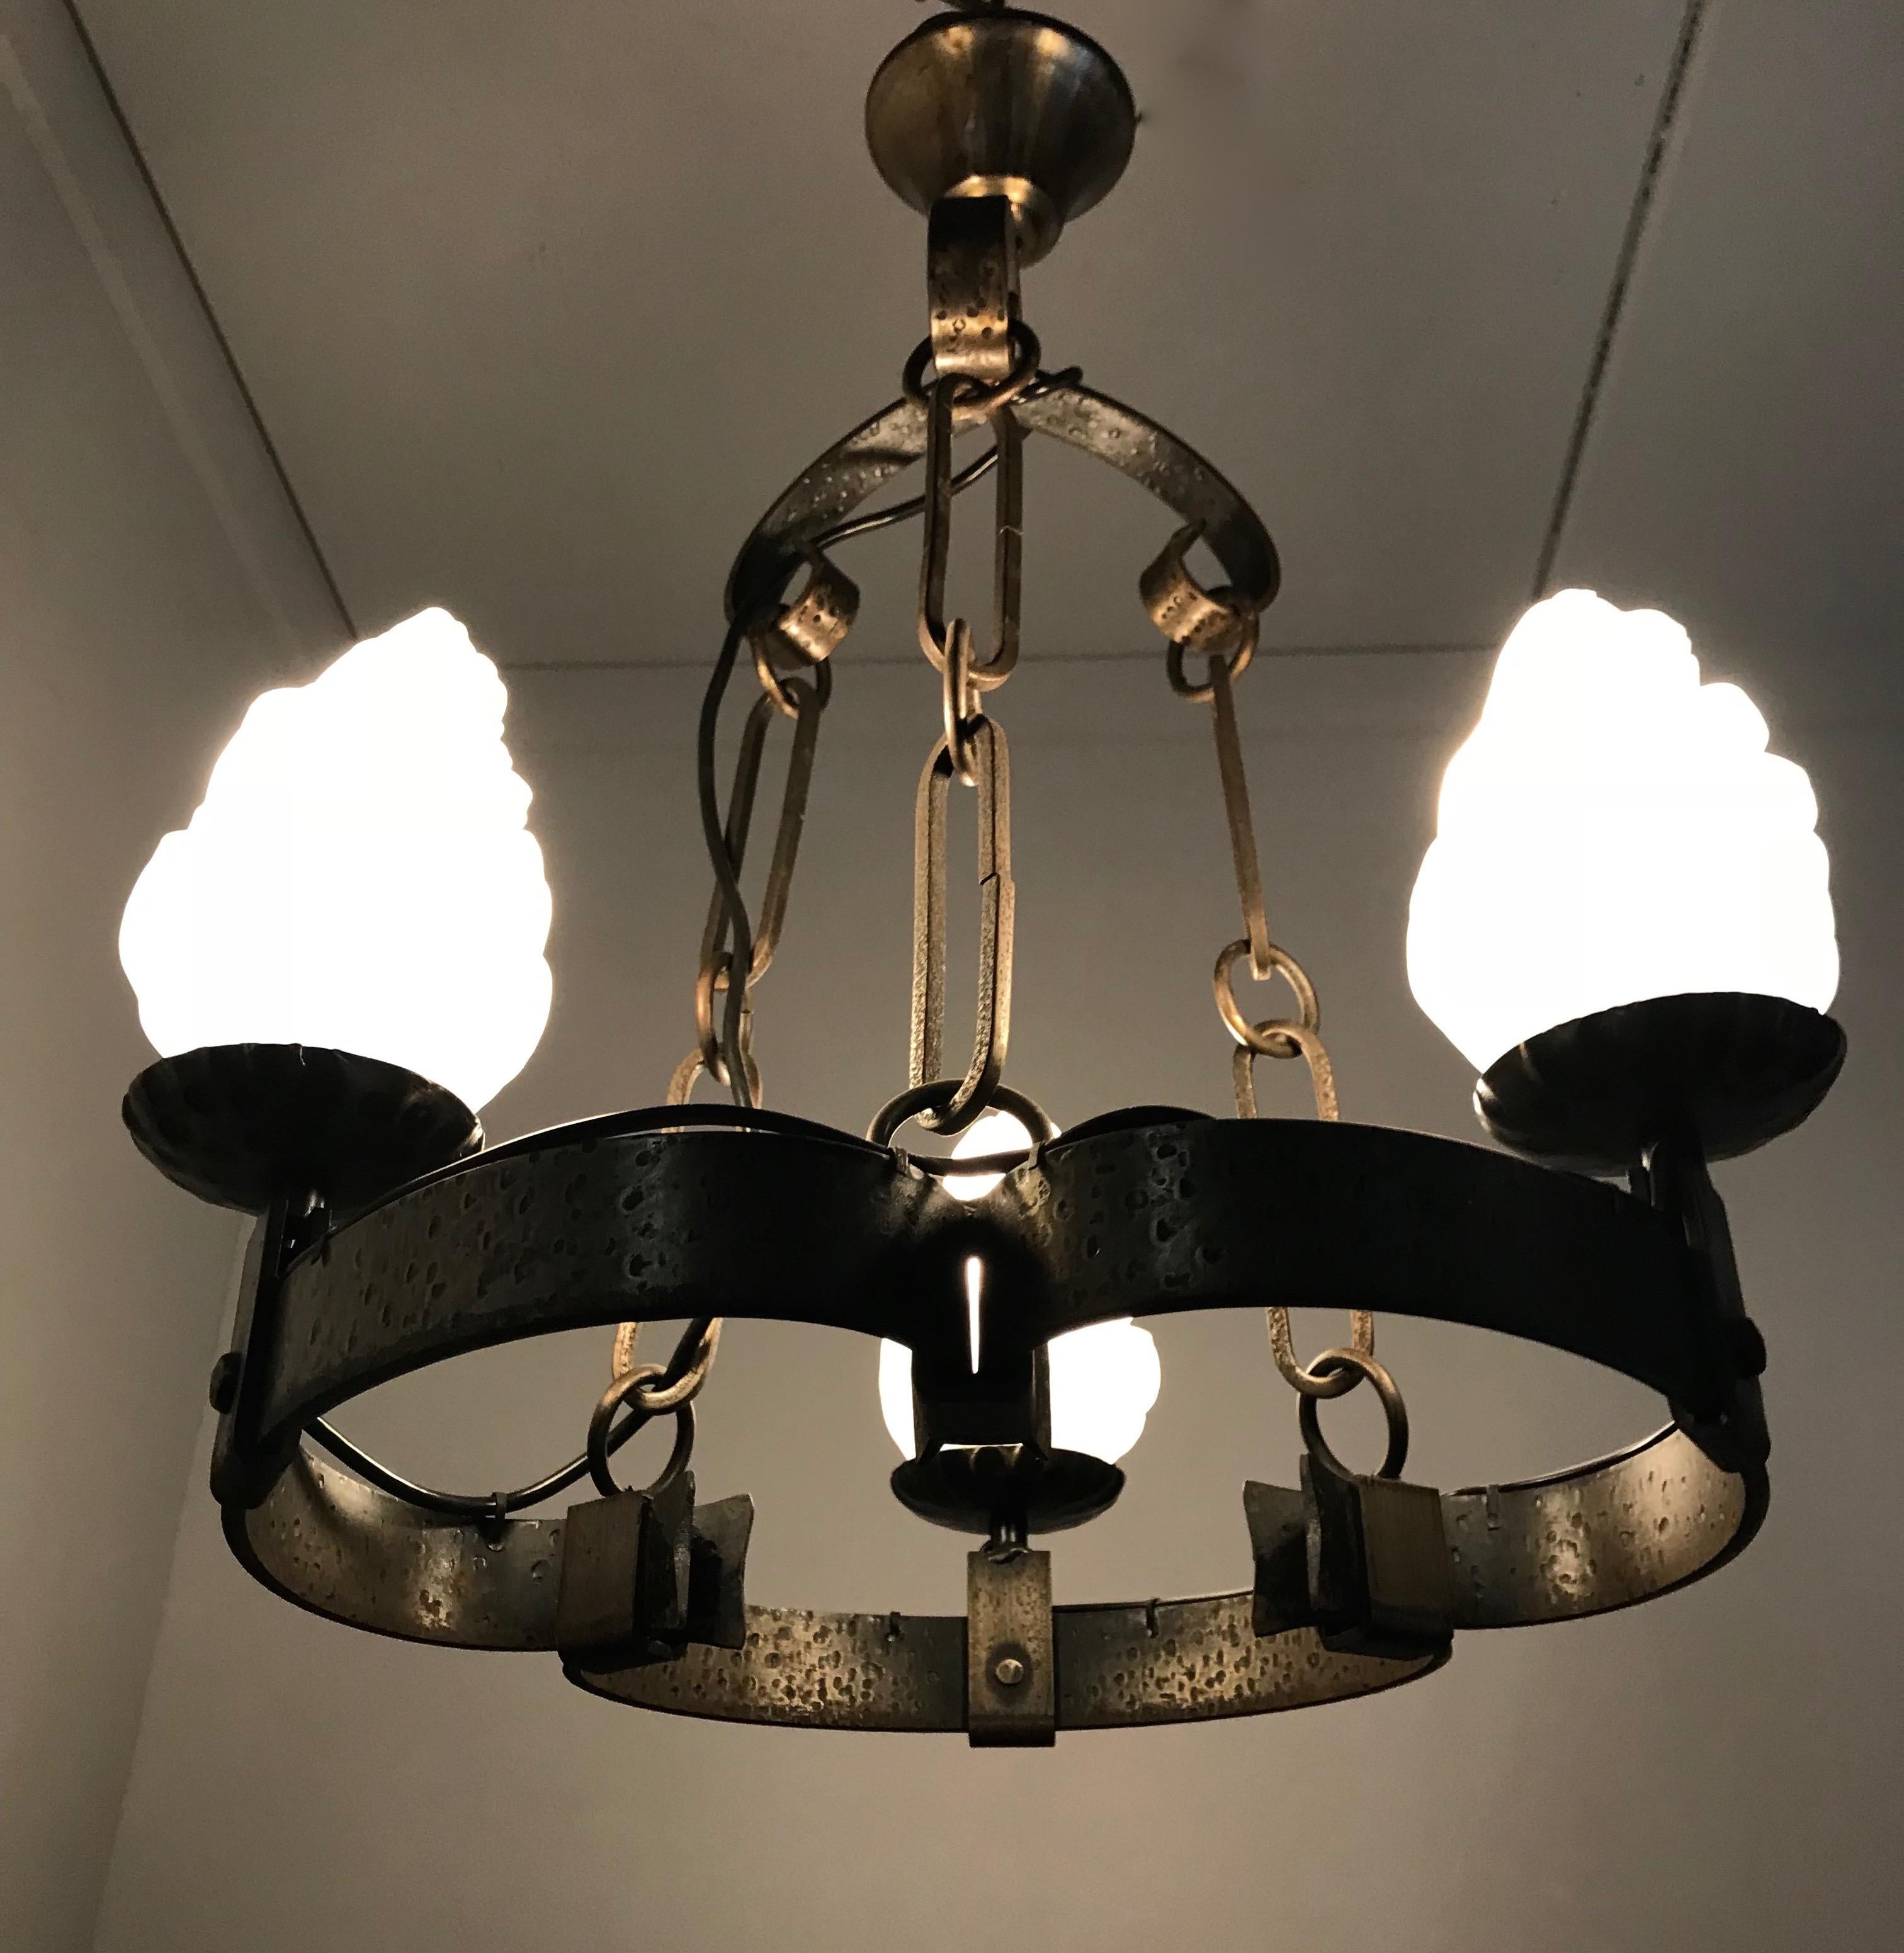 Small size and all handcrafted, castle style chandelier.

This three torch chandelier is practical in size and could be the perfect lighting solution to a space that needs a special atmosphere. The unusual shape when looking at it from the bottom is